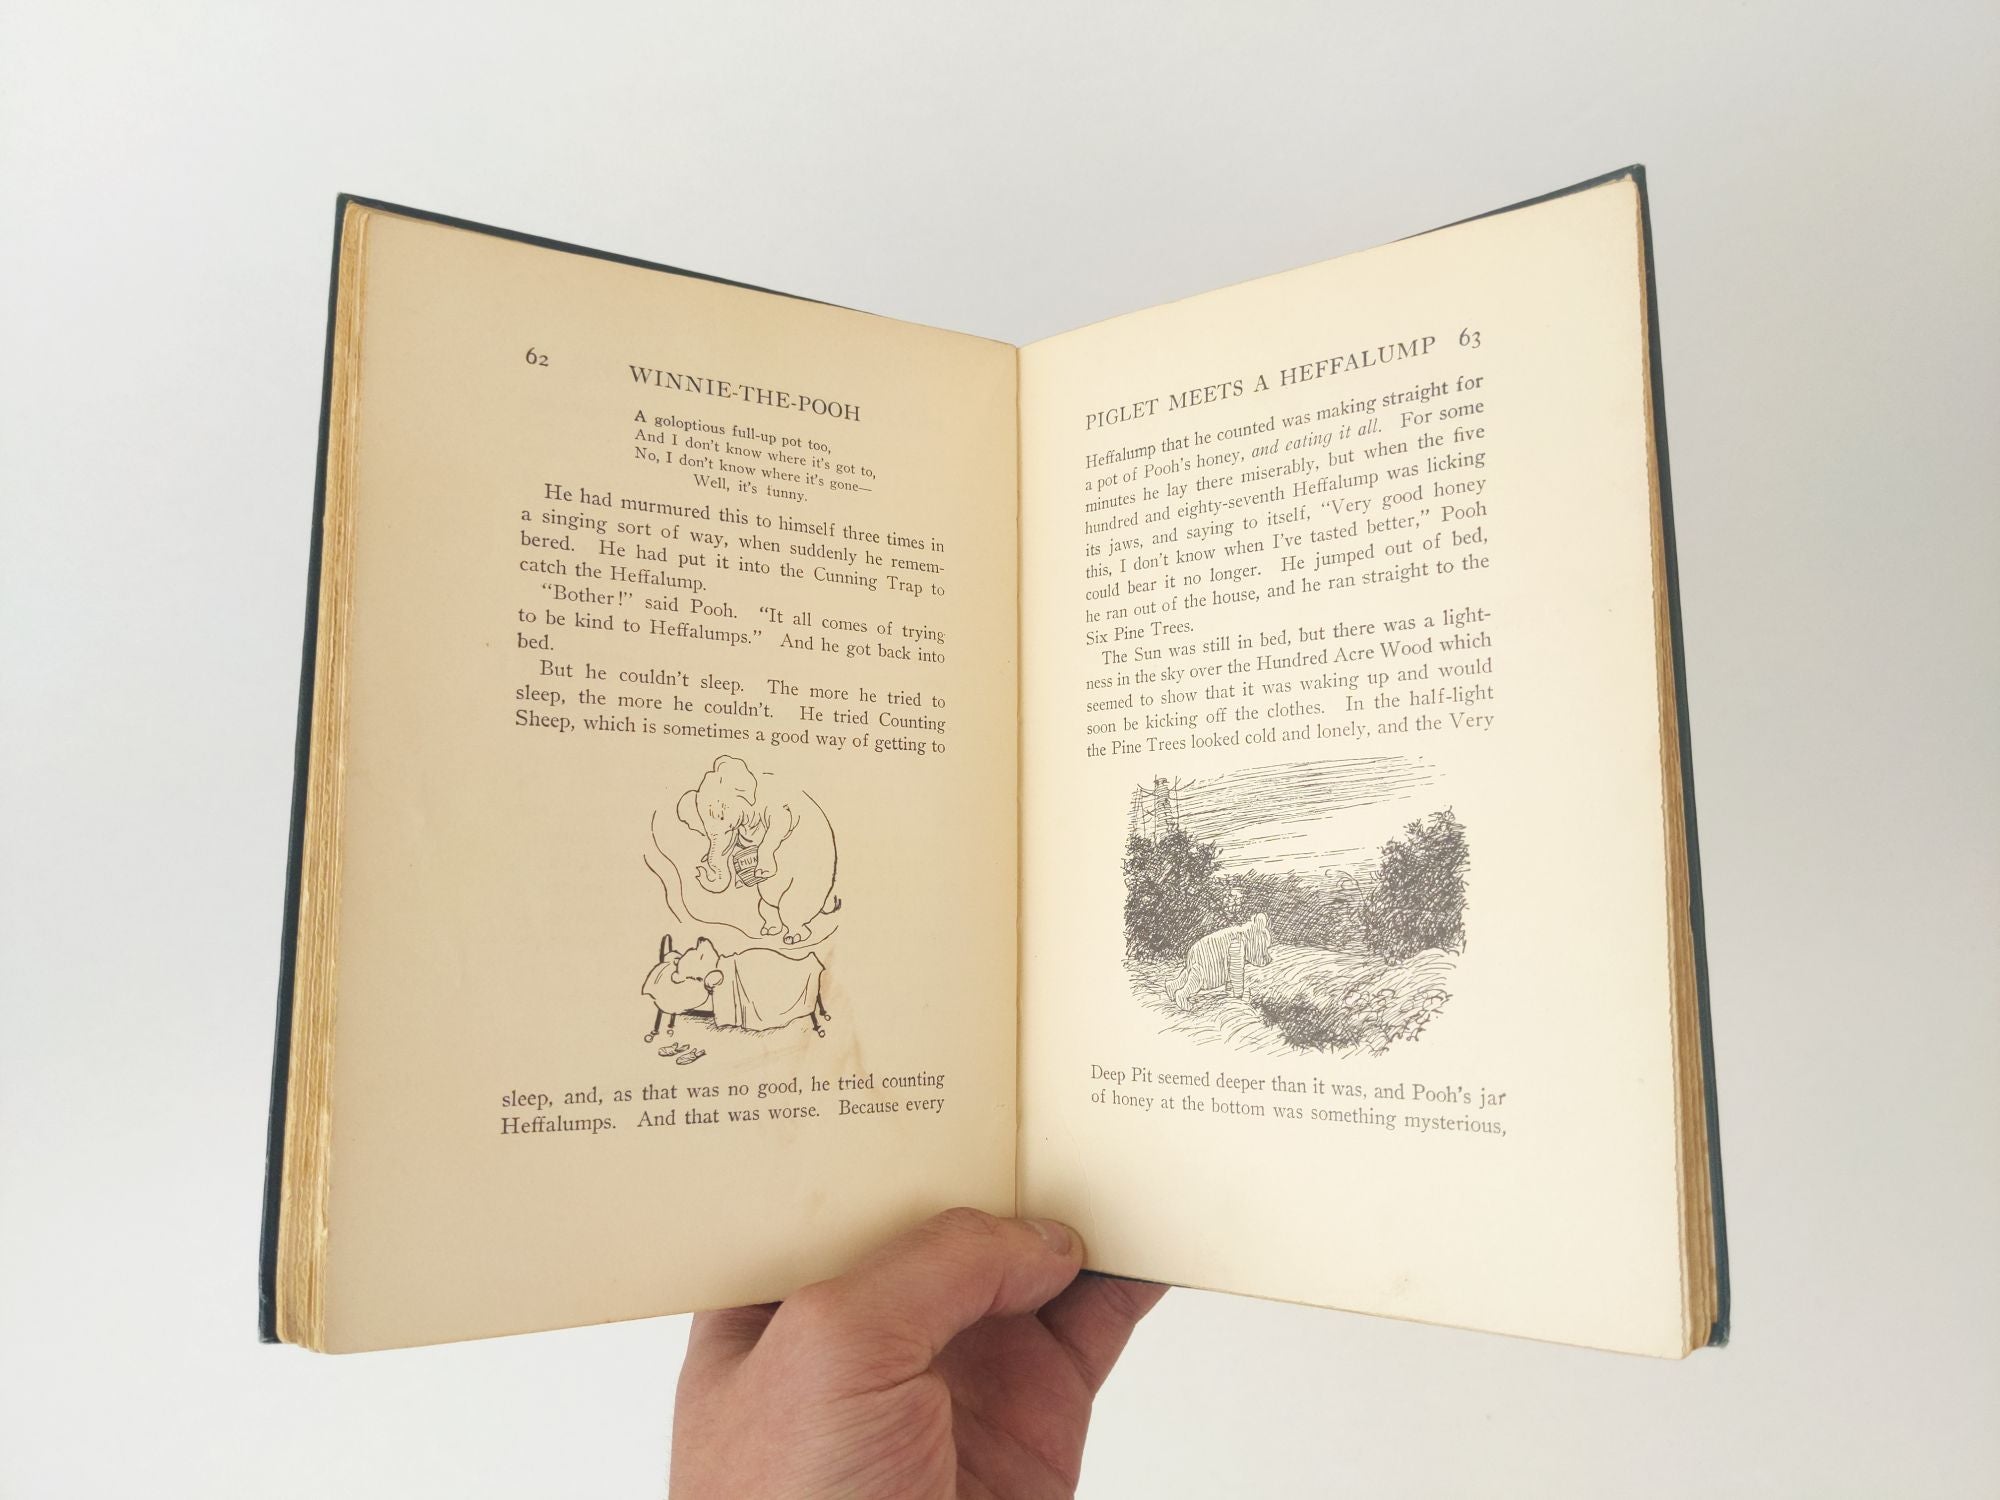 Product Image for WINNIE-THE-POOH